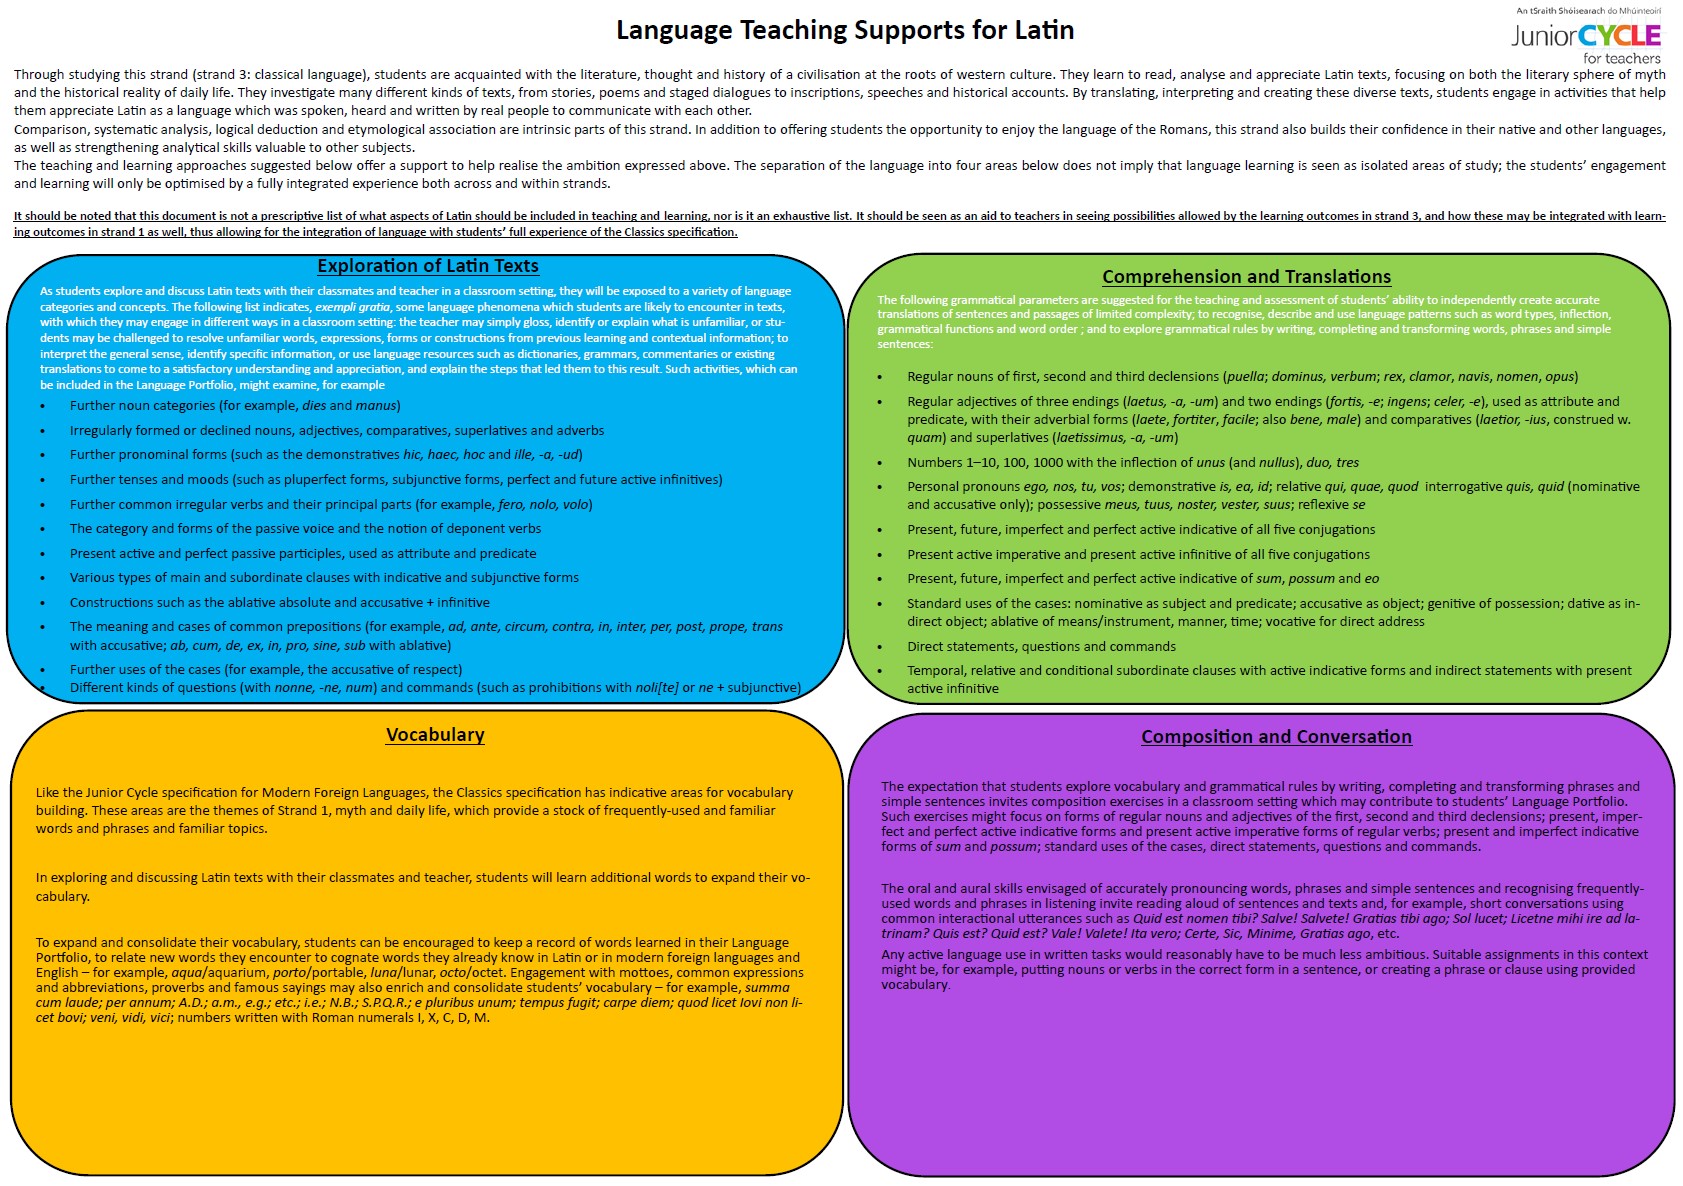 Latin Teaching Supports Poster